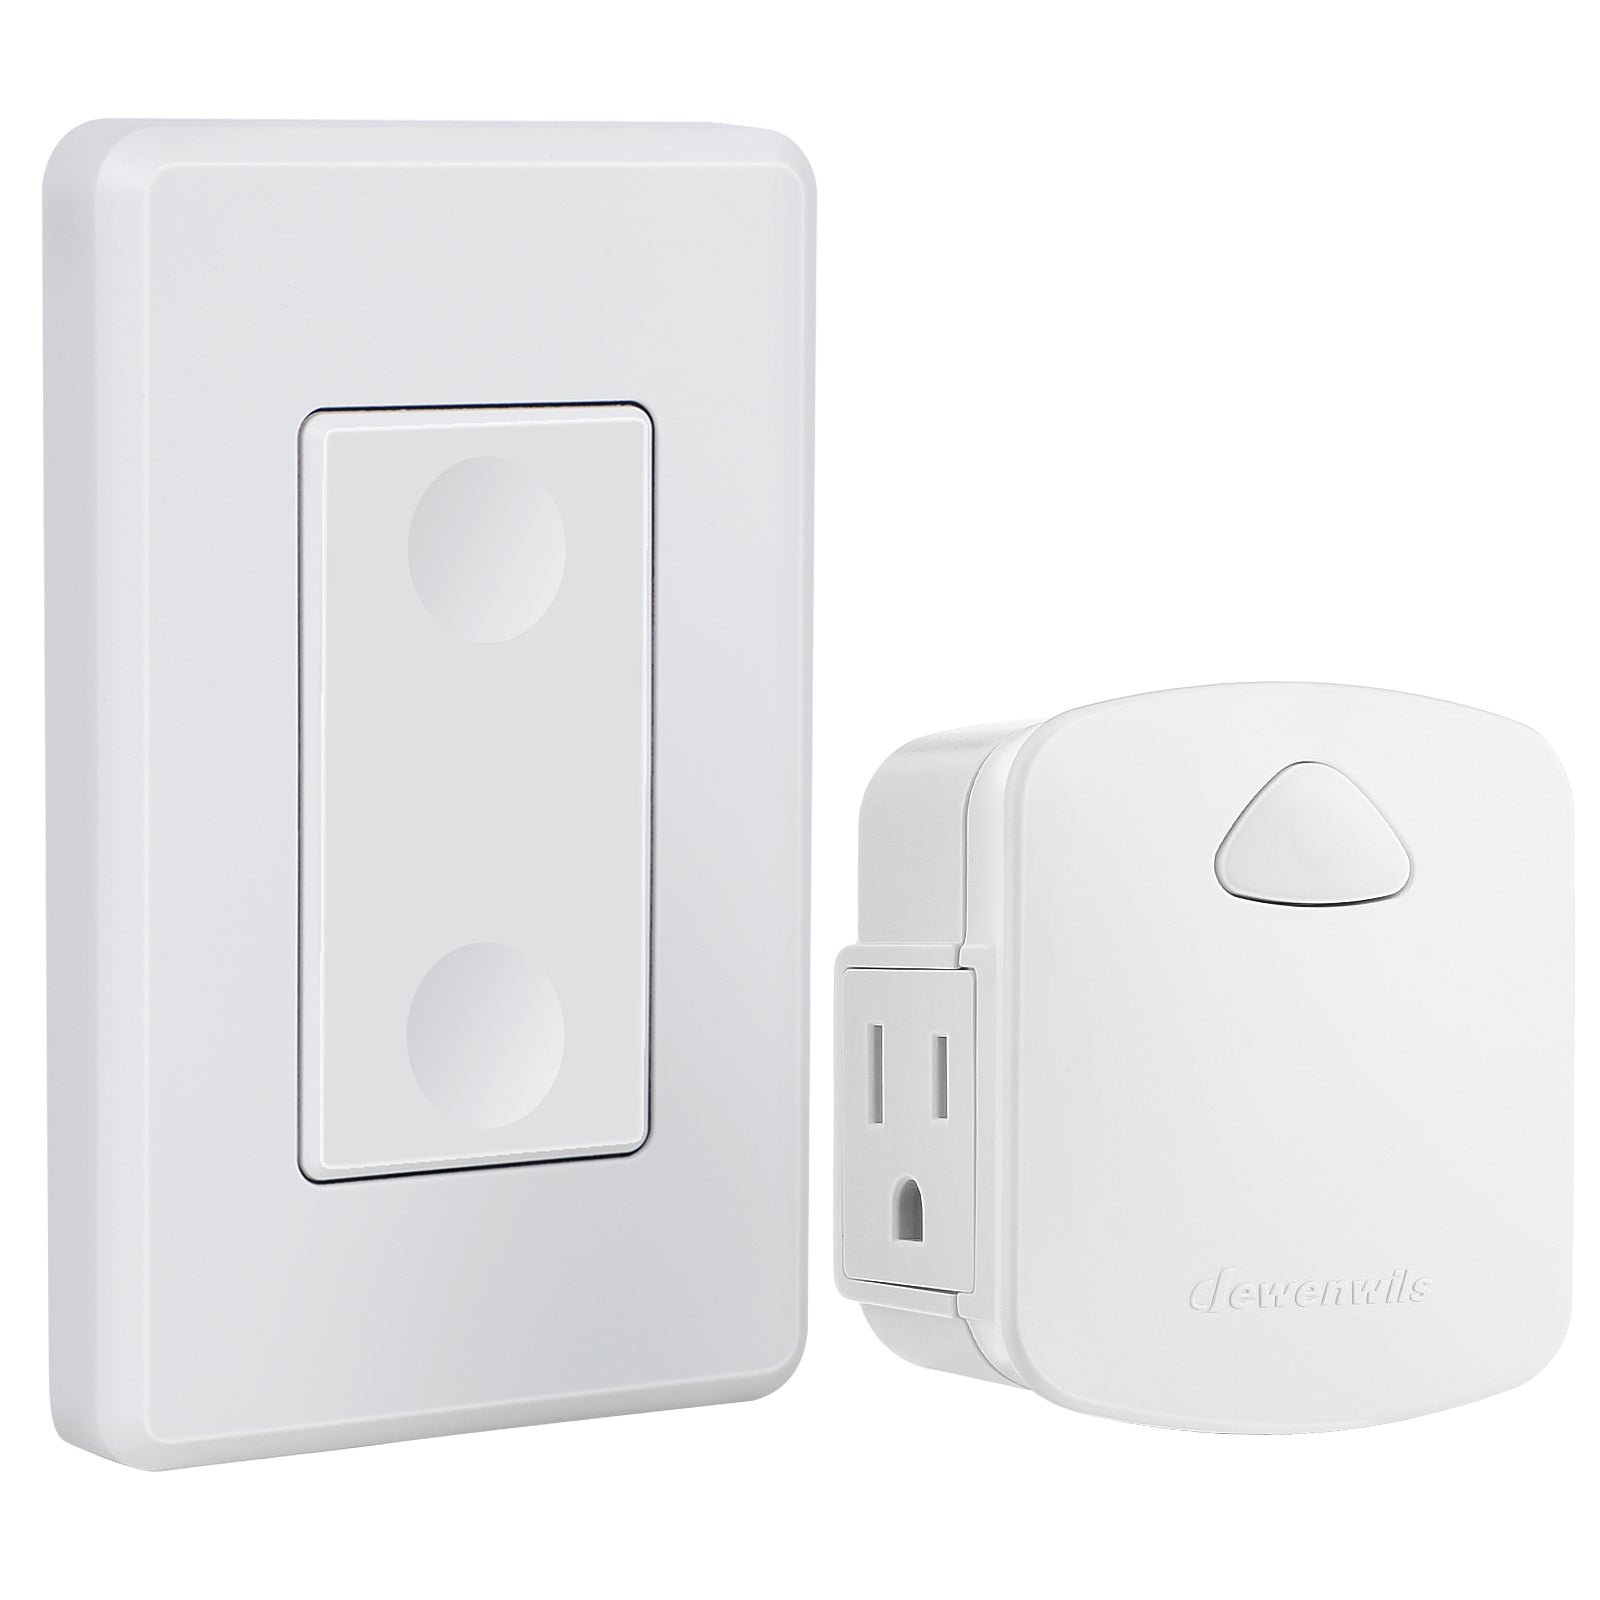 DEWENWILS Wireless Light Switch Remote Control Outlet, Remote Power Wall  Switch for Lamps, No Wiring Needed, 15 AMP Heavy Duty, 100 FT Range